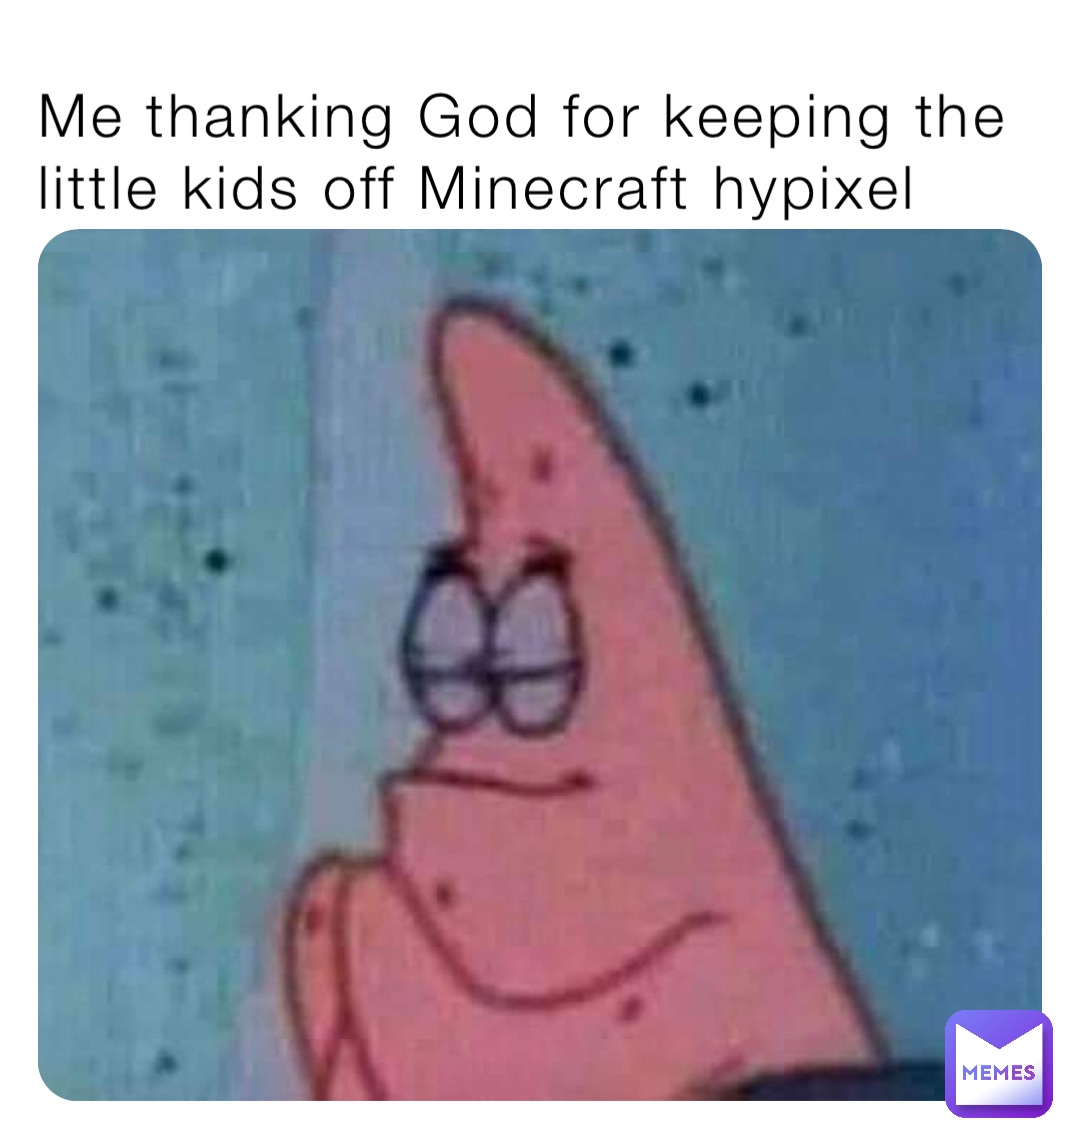 Me thanking God for keeping the little kids off Minecraft hypixel